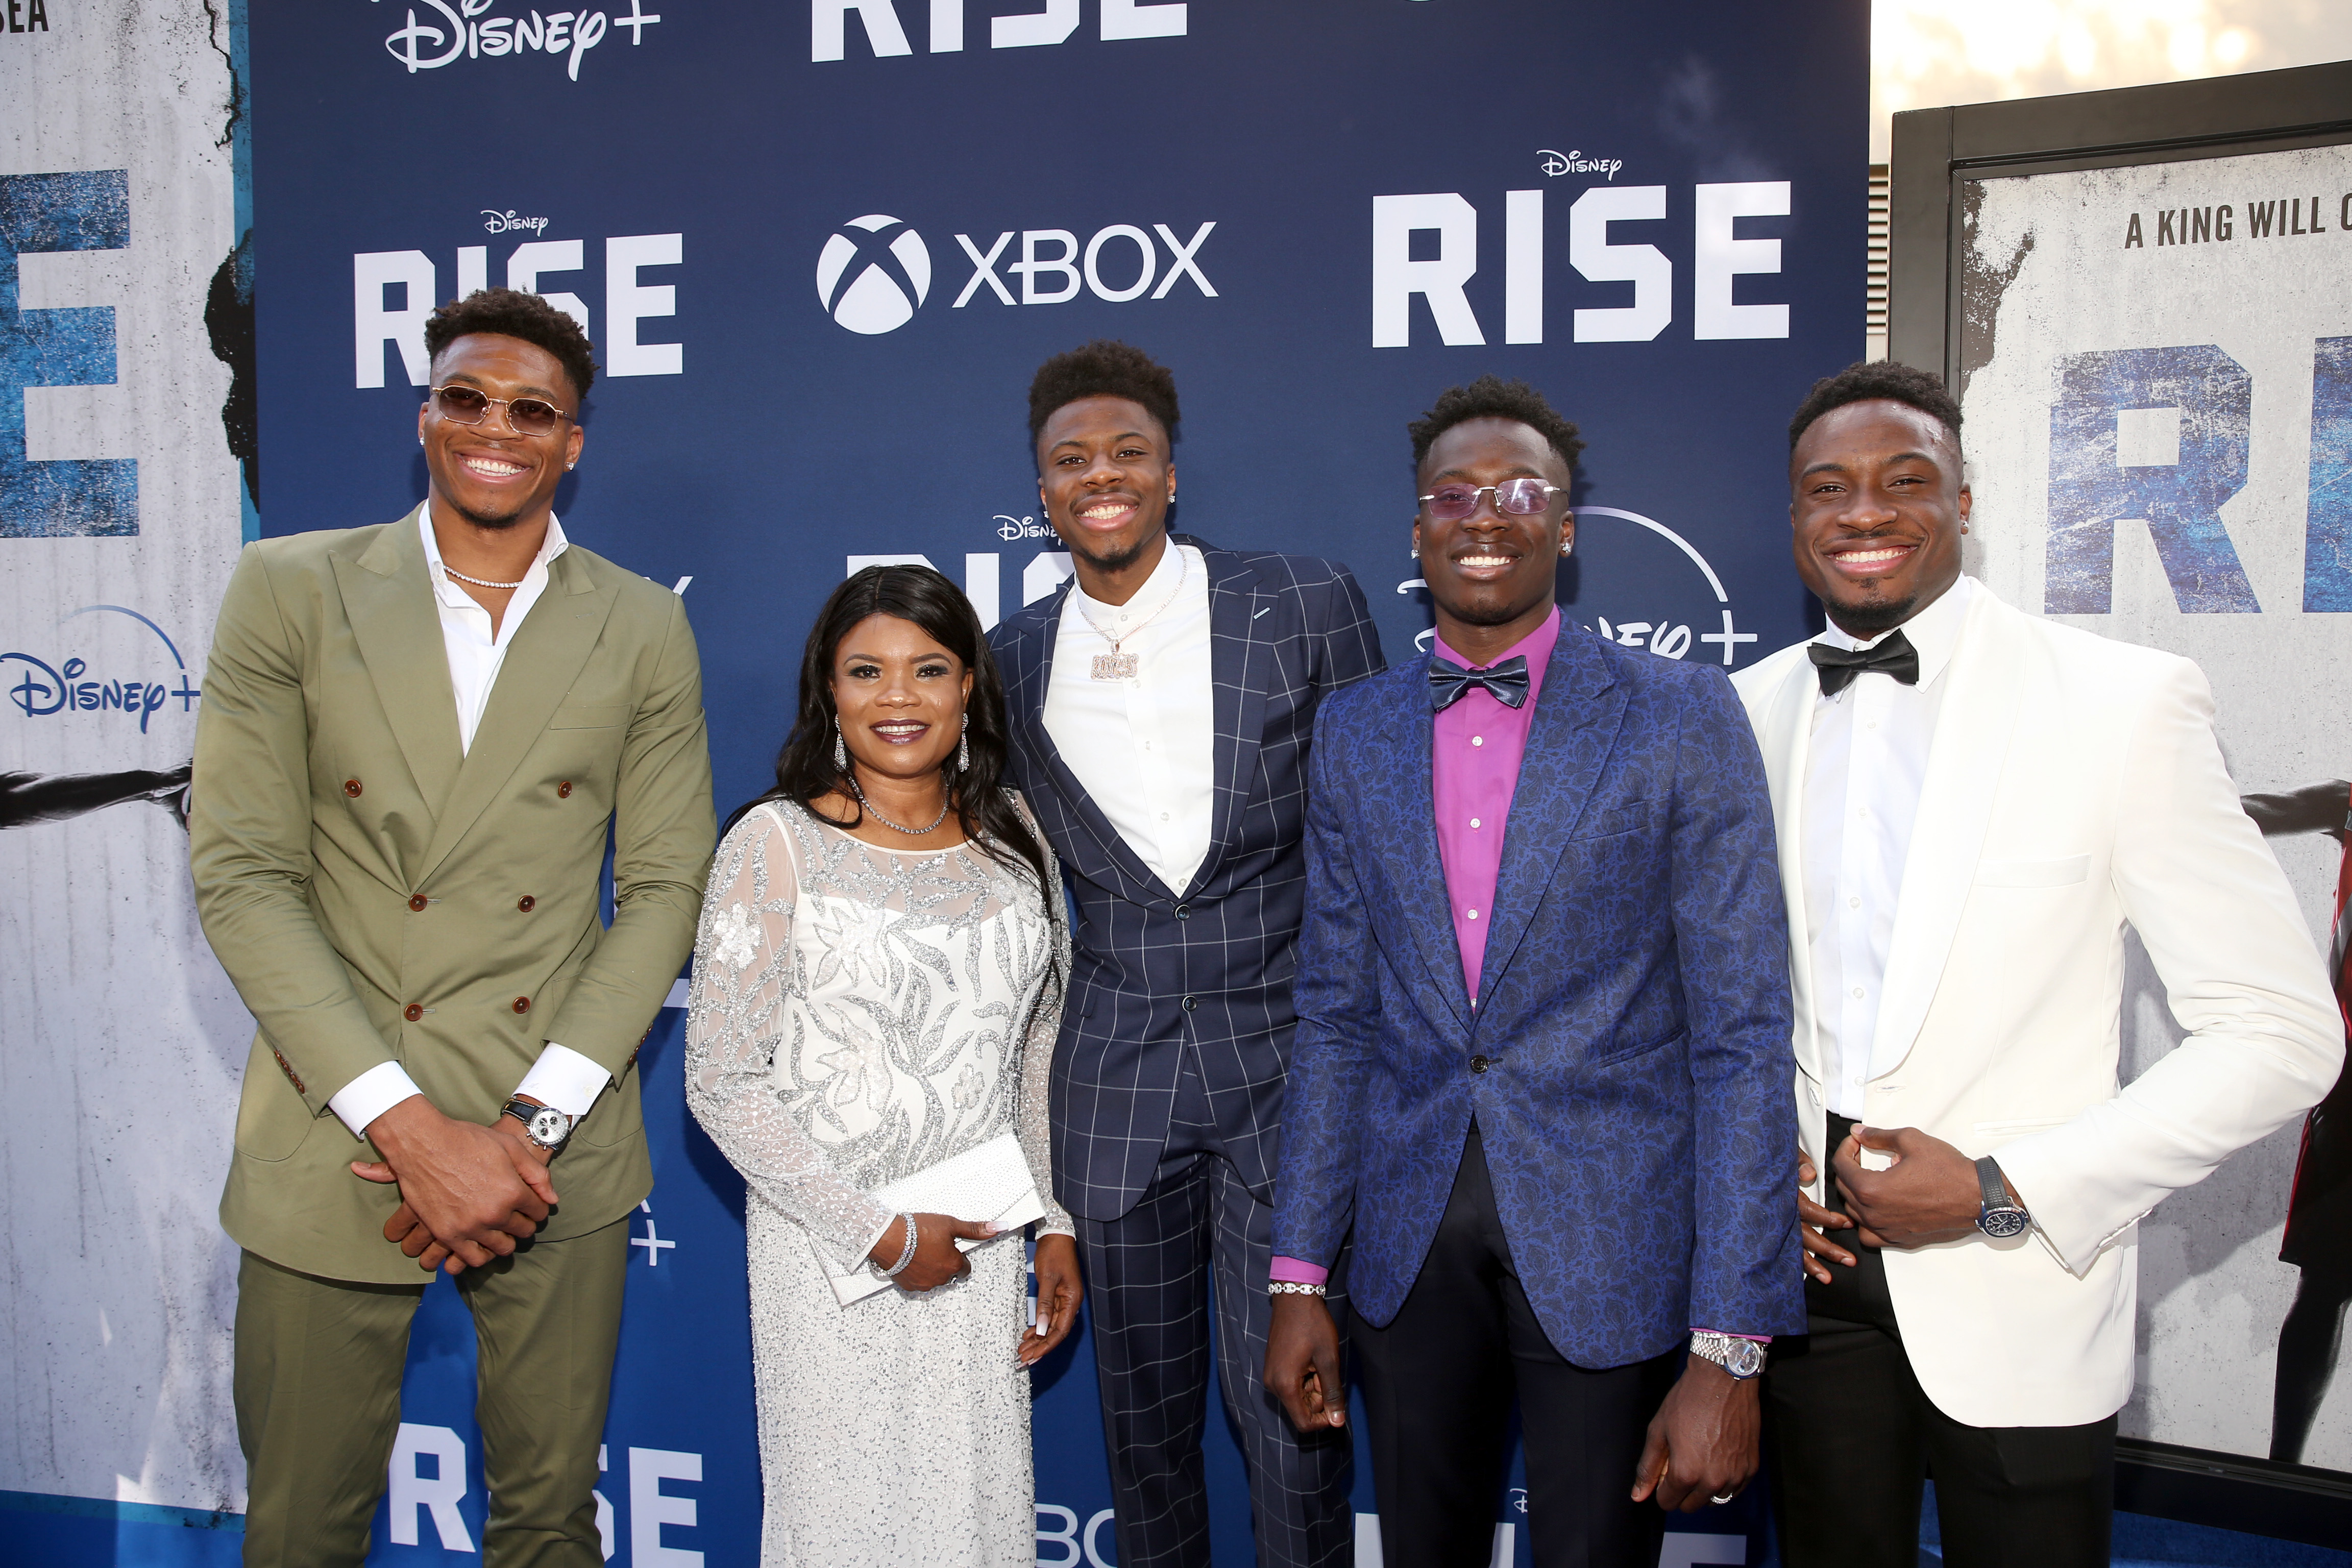 Giannis, Veronica, Kostas, Alex, and Thanasis Antetokounmpo at the world premiere of "Rise" in Burbank, California, on June 22, 2022. | Source: Getty Images